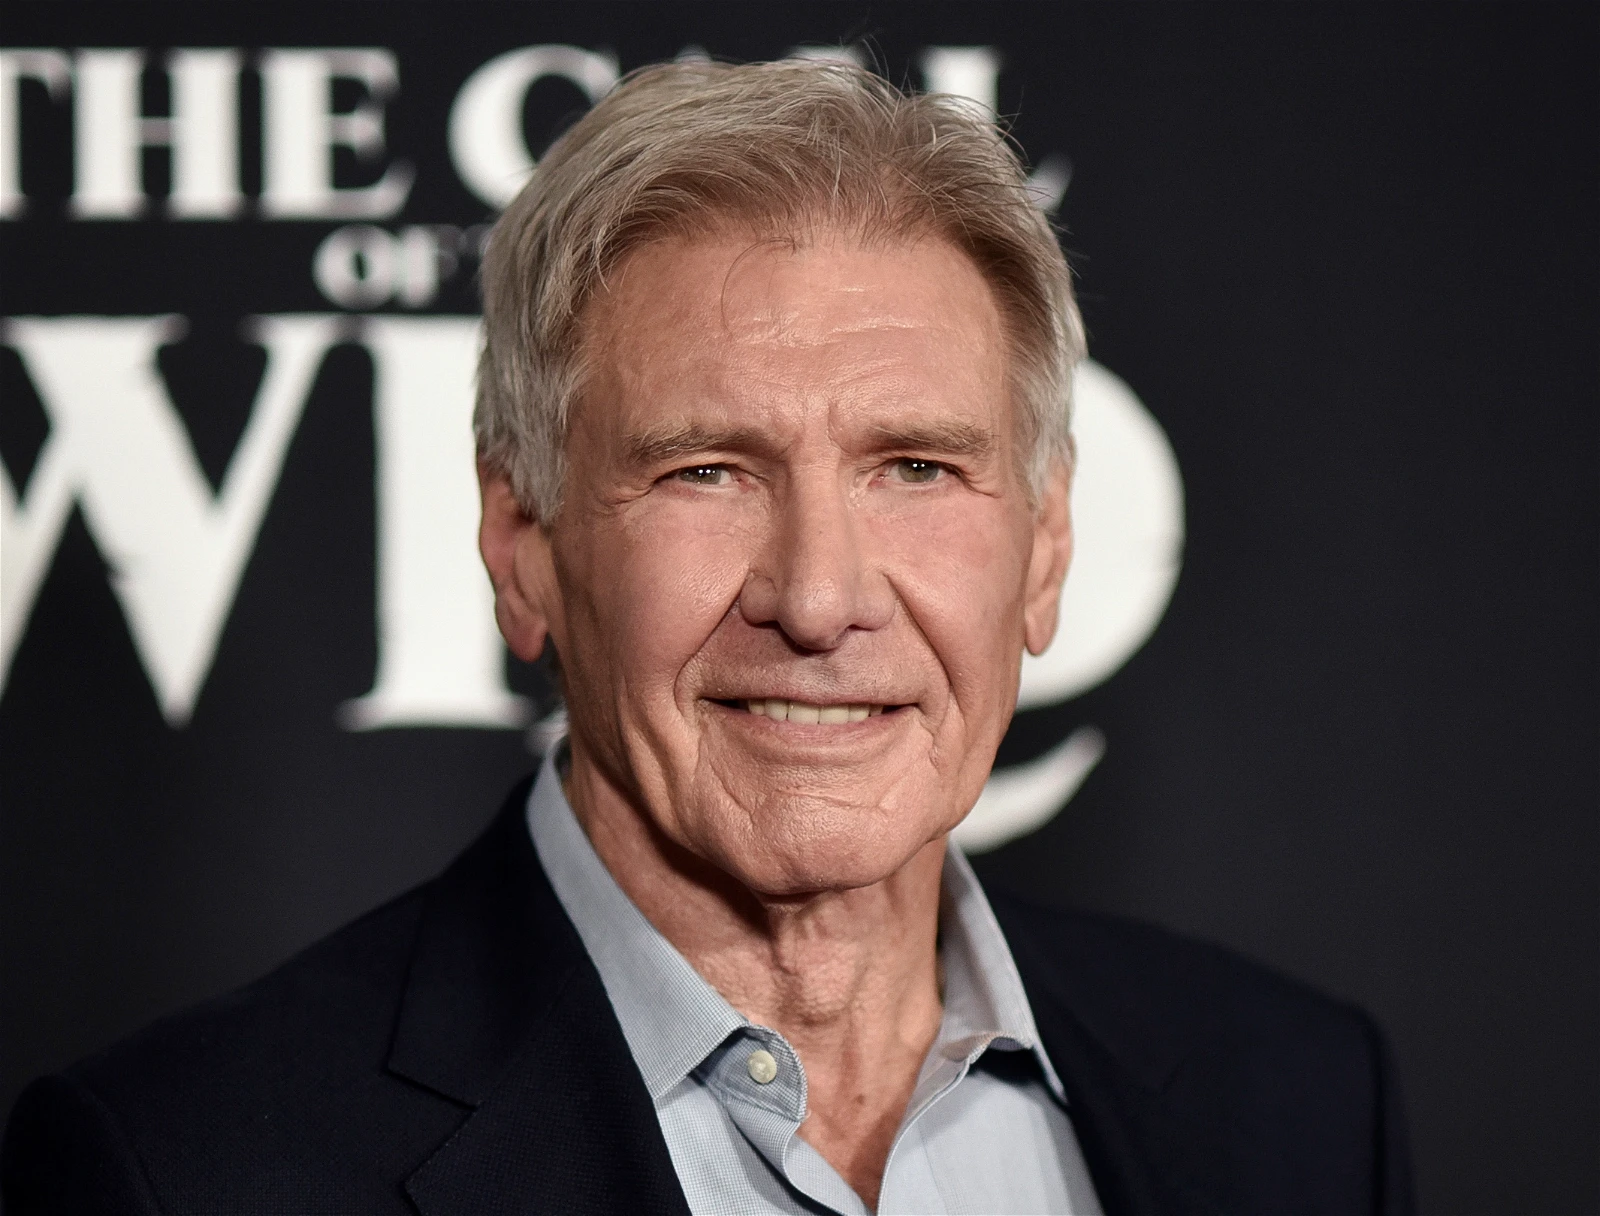 Harrison Ford has a long history of feuds with his co-stars